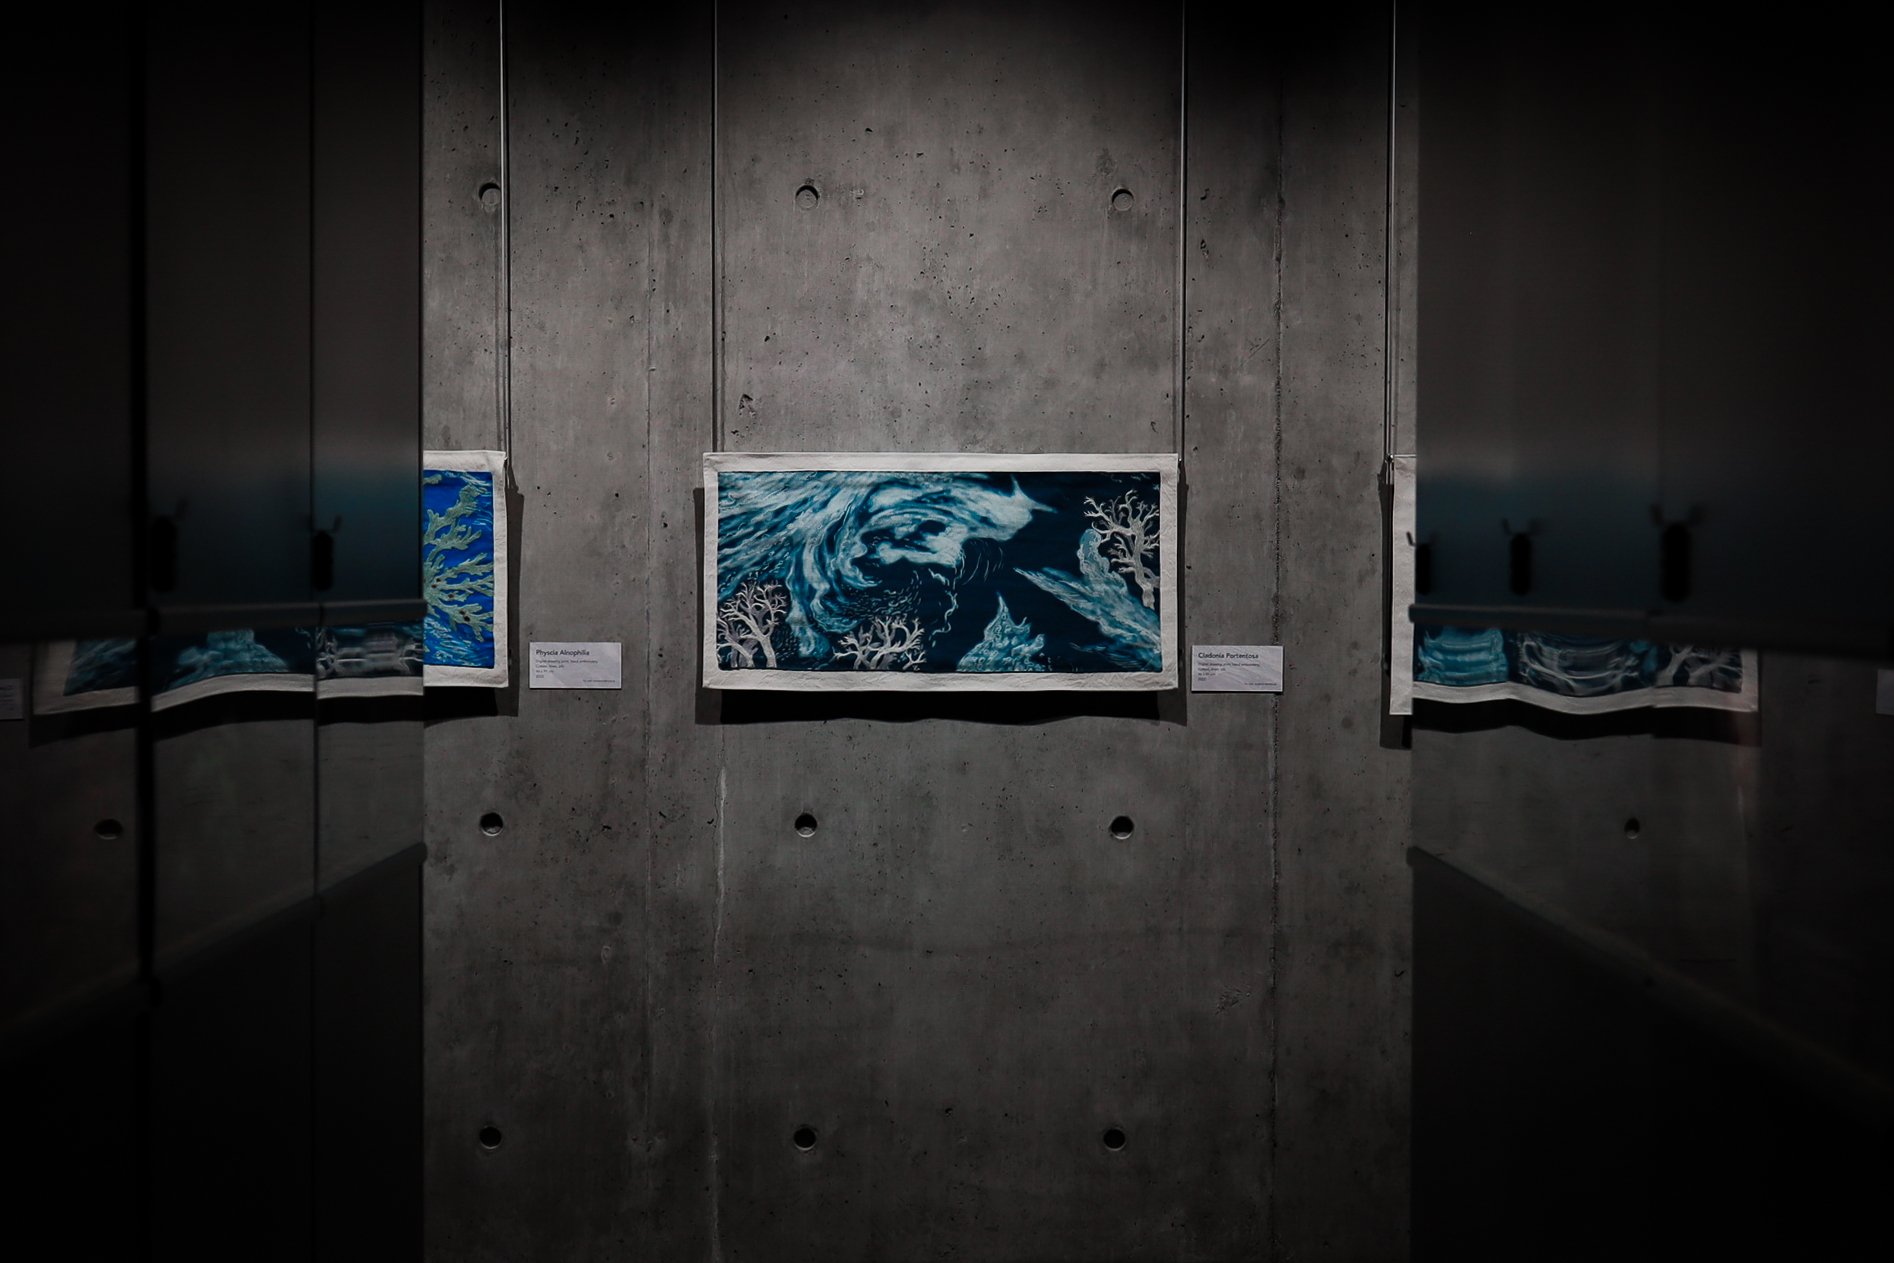 Each piece on display along the side wall of the Biodiversity Museum features a fabric screen on which is printed a hand-drawn digital image traced by Matzkuhn from satellite pictures of cloud formations.